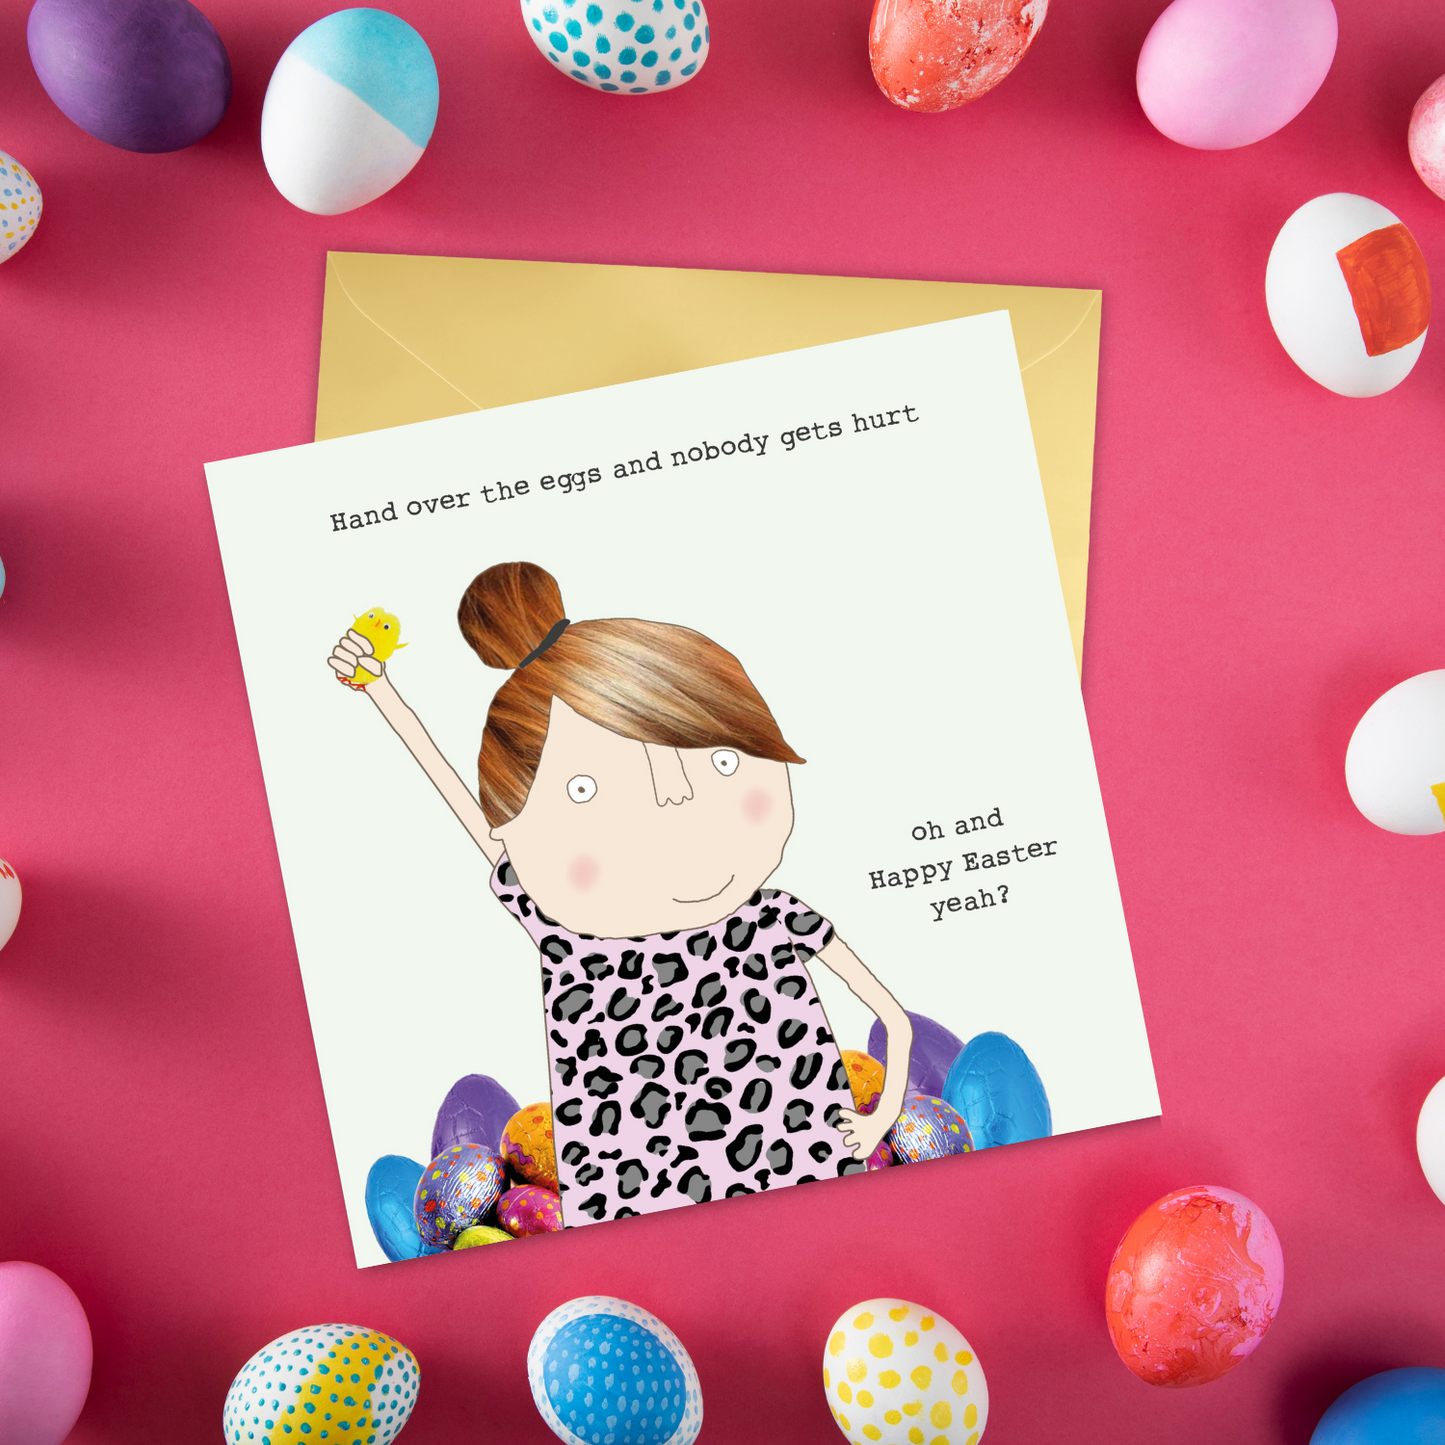 Rosie Made A Thing Hand Over The Eggs Egg Standoff! Easter Funny Greeting Card